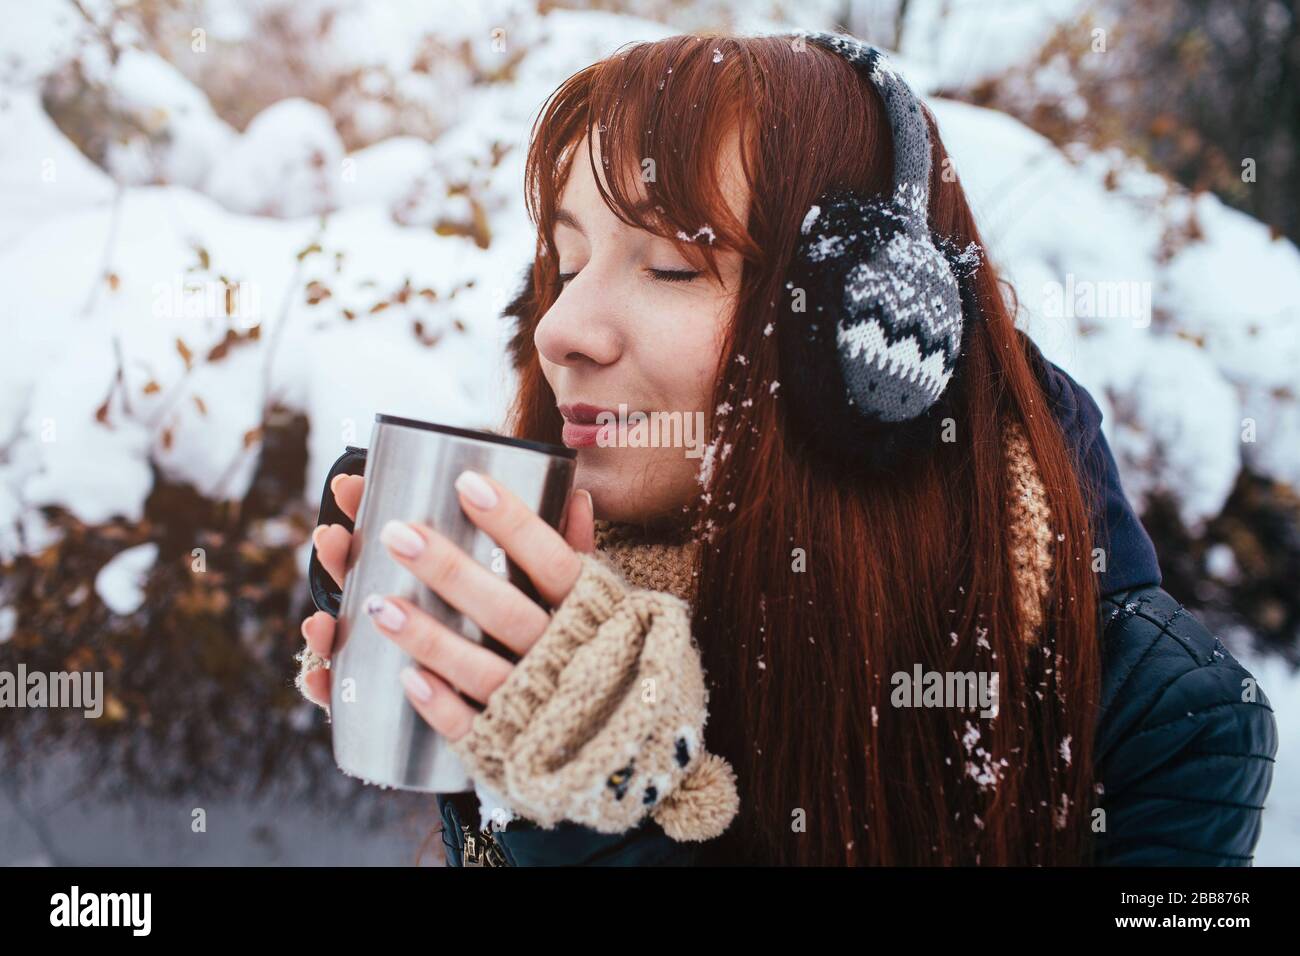 Winter. Woman with red hair wearing ear muffs. Girl drinking hot tea or coffee with iron insulated cup. Stock Photo